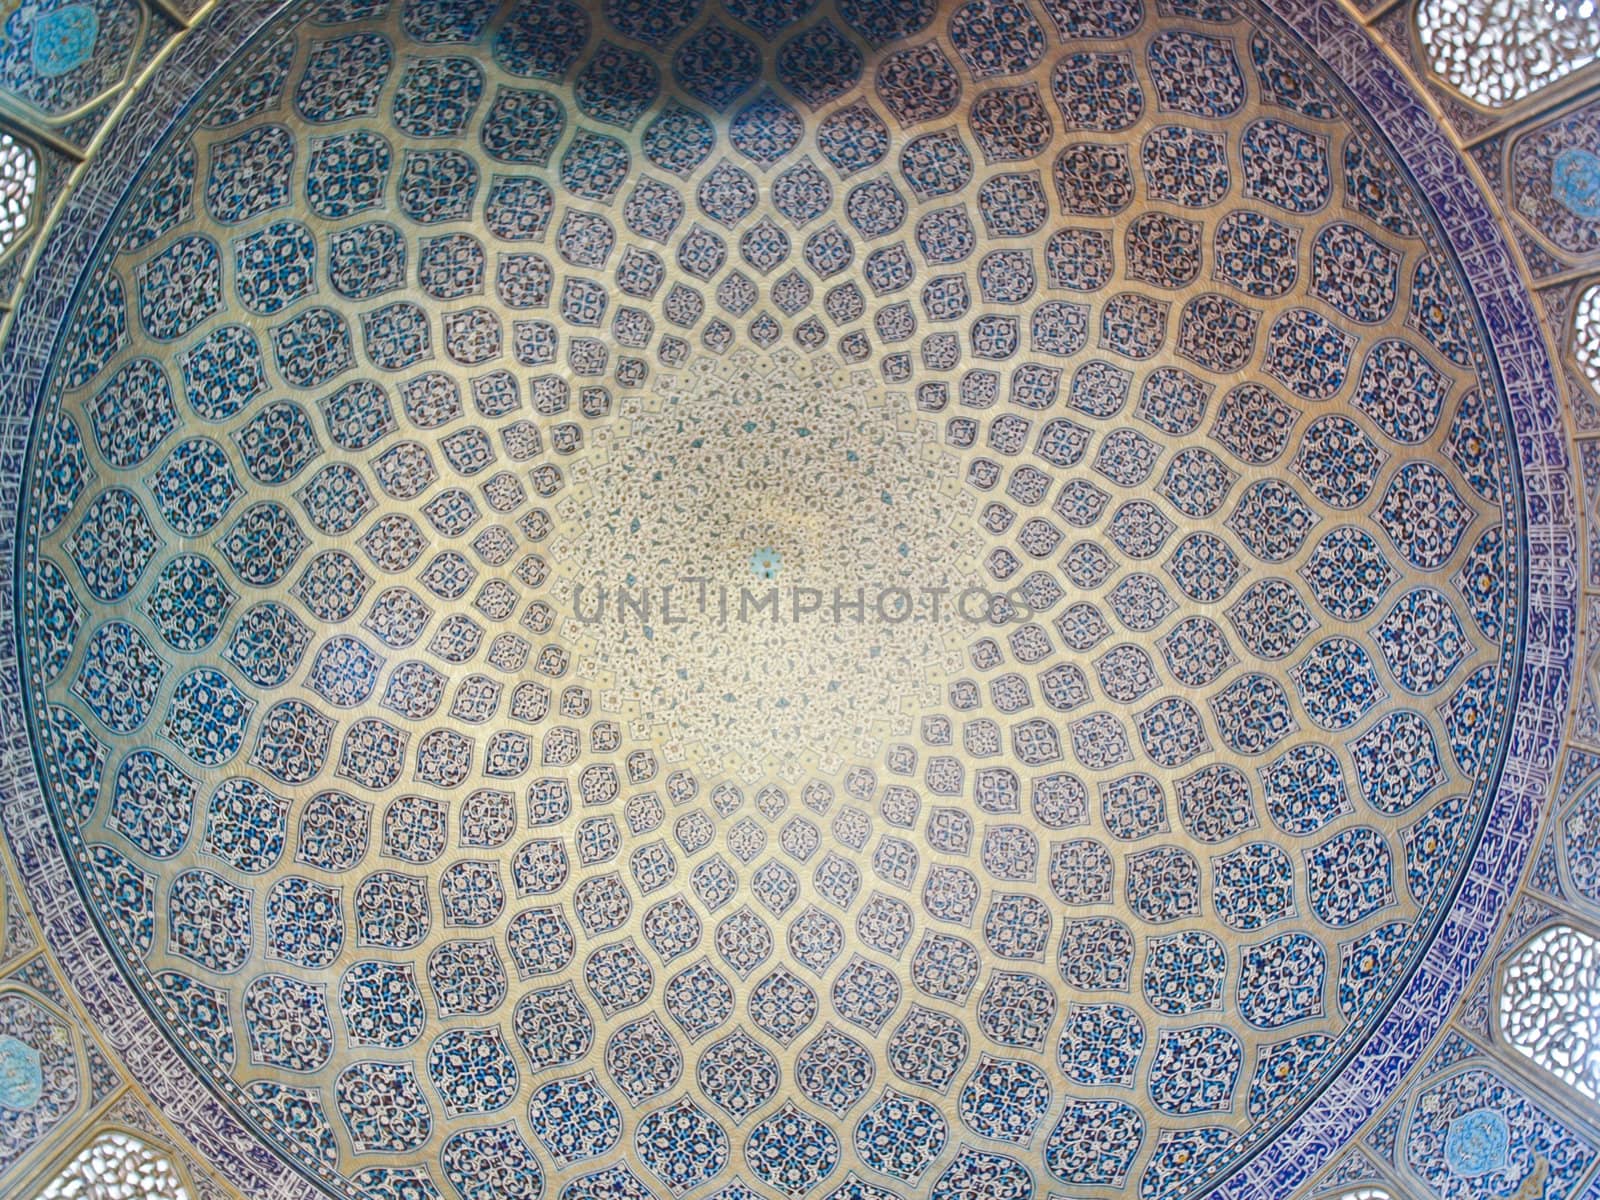 Dome of the mosque, oriental ornaments from Sheikh Loft Allah Mosque in Isfahan, Iran